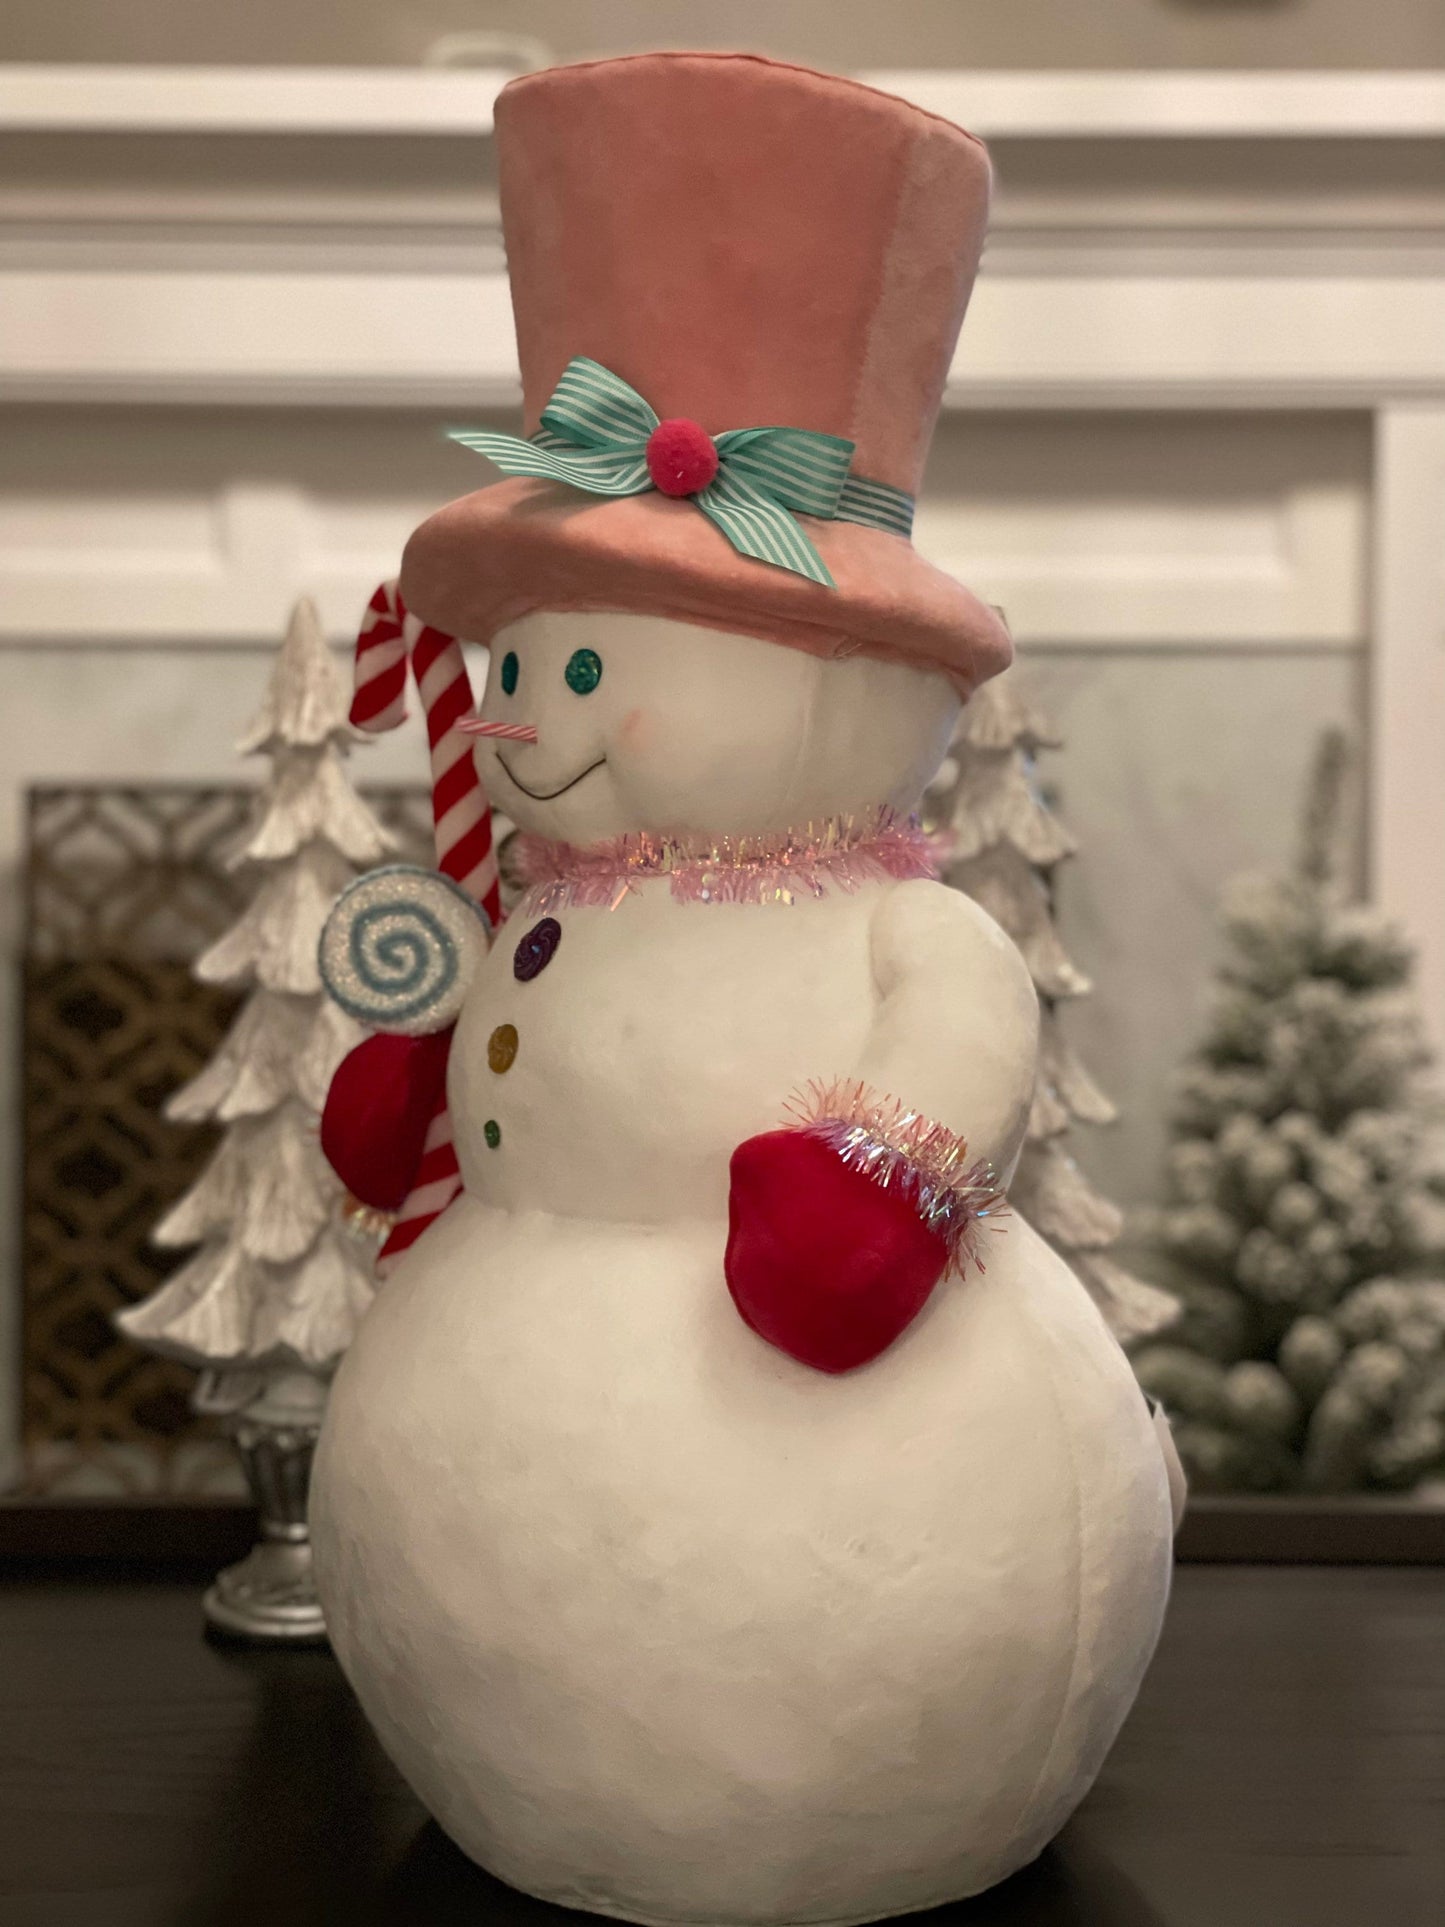 24”h x 13.4” w Snowman with pink hat holding a candy cane. Christmas. Ornament. Tabletop. Display.